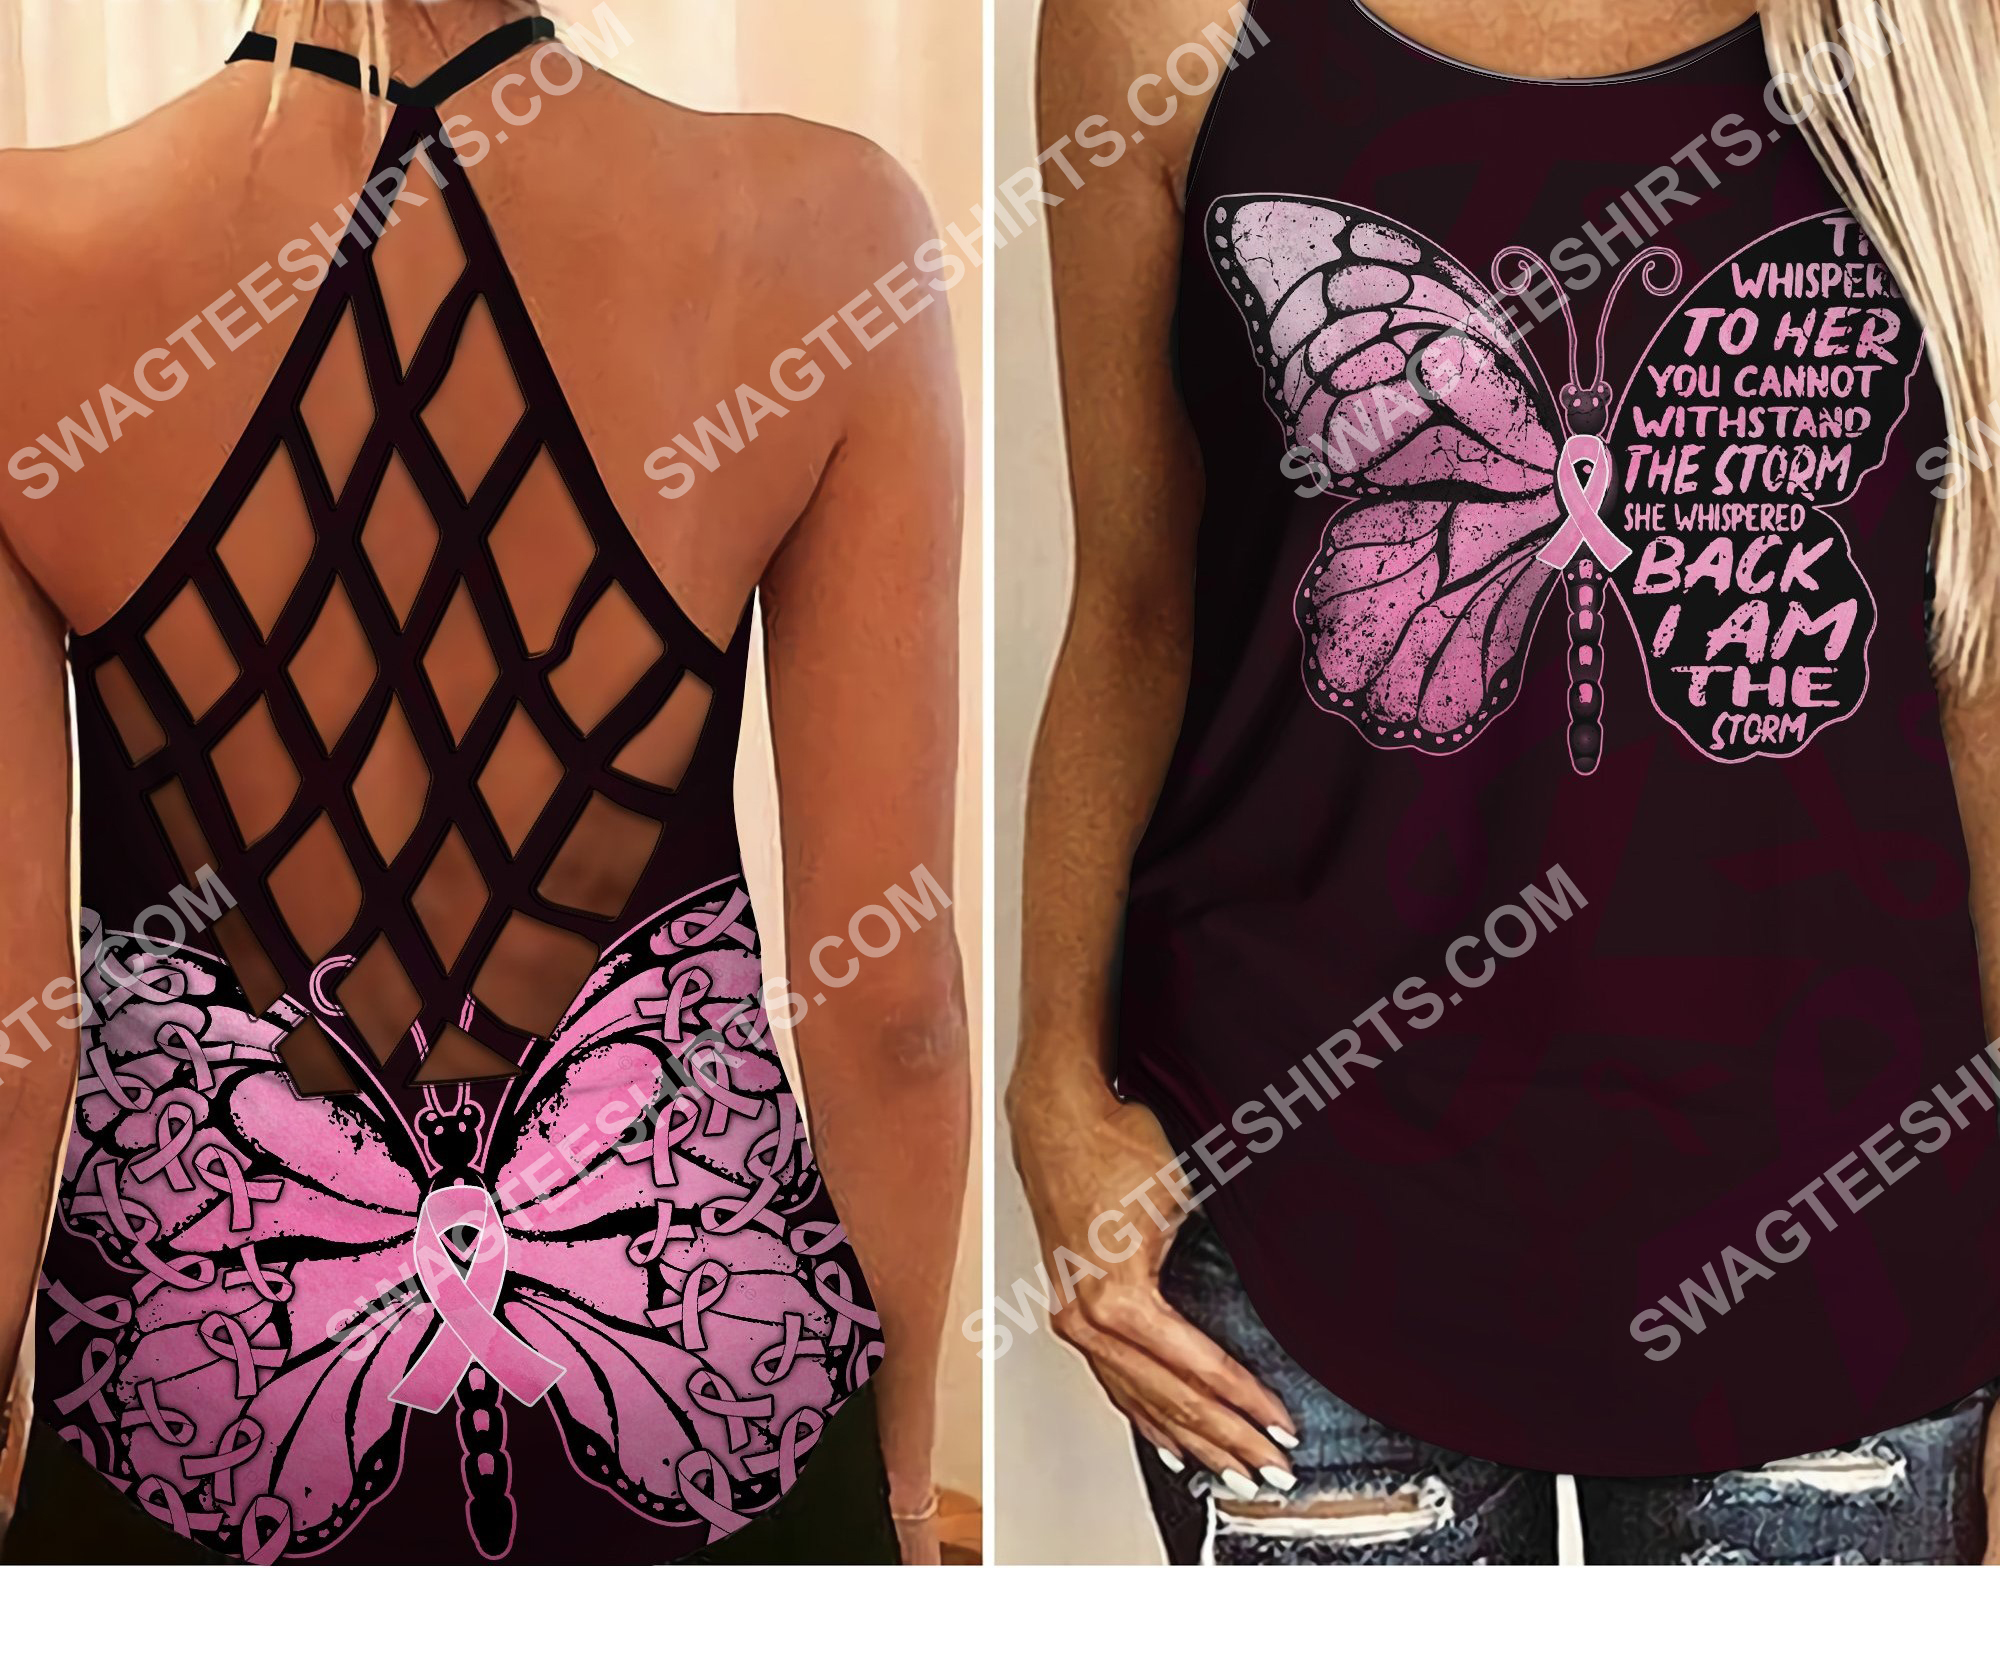 they whispered to her you cannot withstand the storm breast cancer criss-cross tank top 2 - Copy